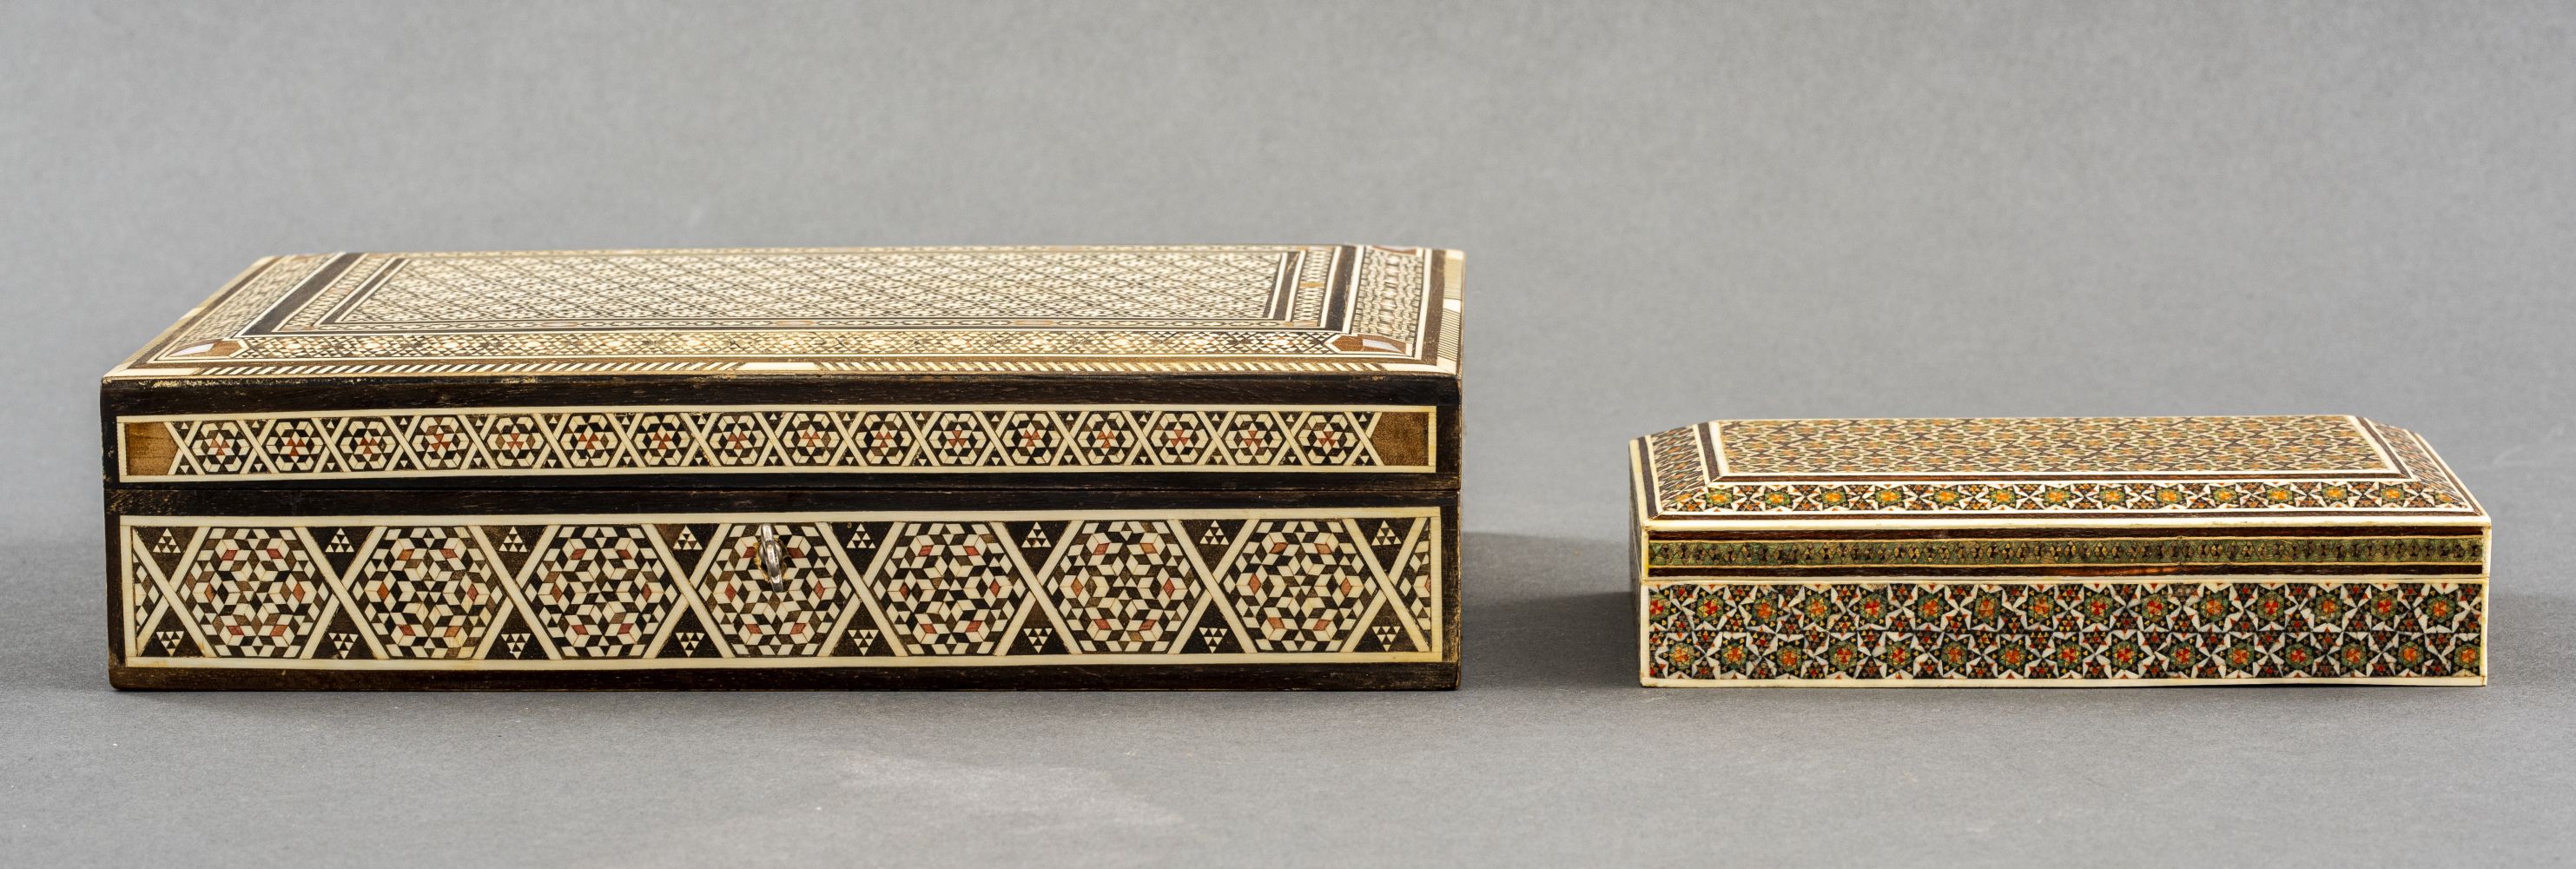 SYRIAN INLAID WOOD BOXES 2 Two 3c570d